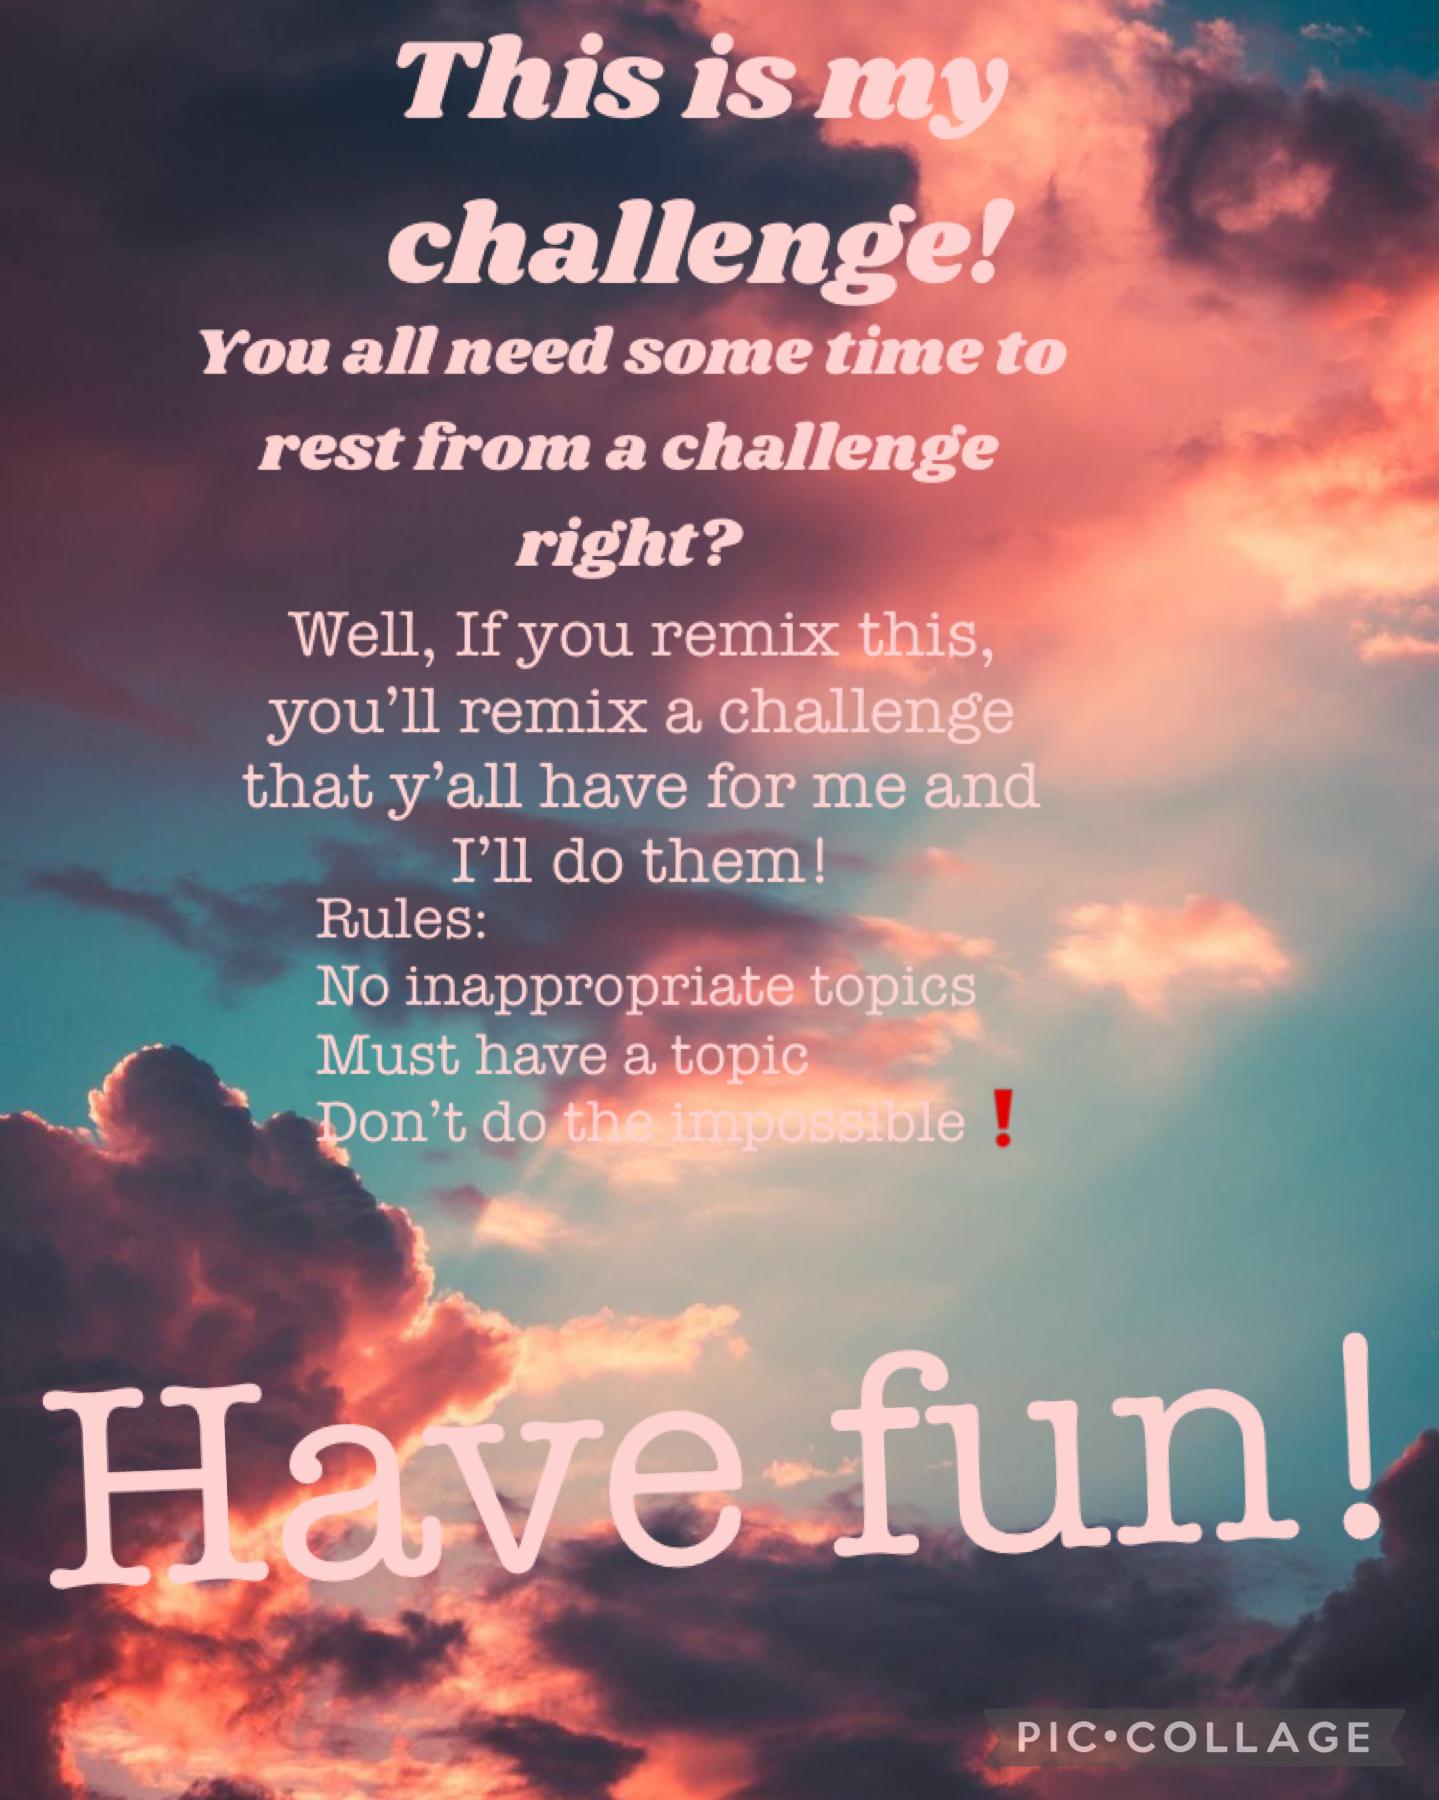 This is the next challenge... but y’all will make  Ed it and I’ll do it! Have fun!